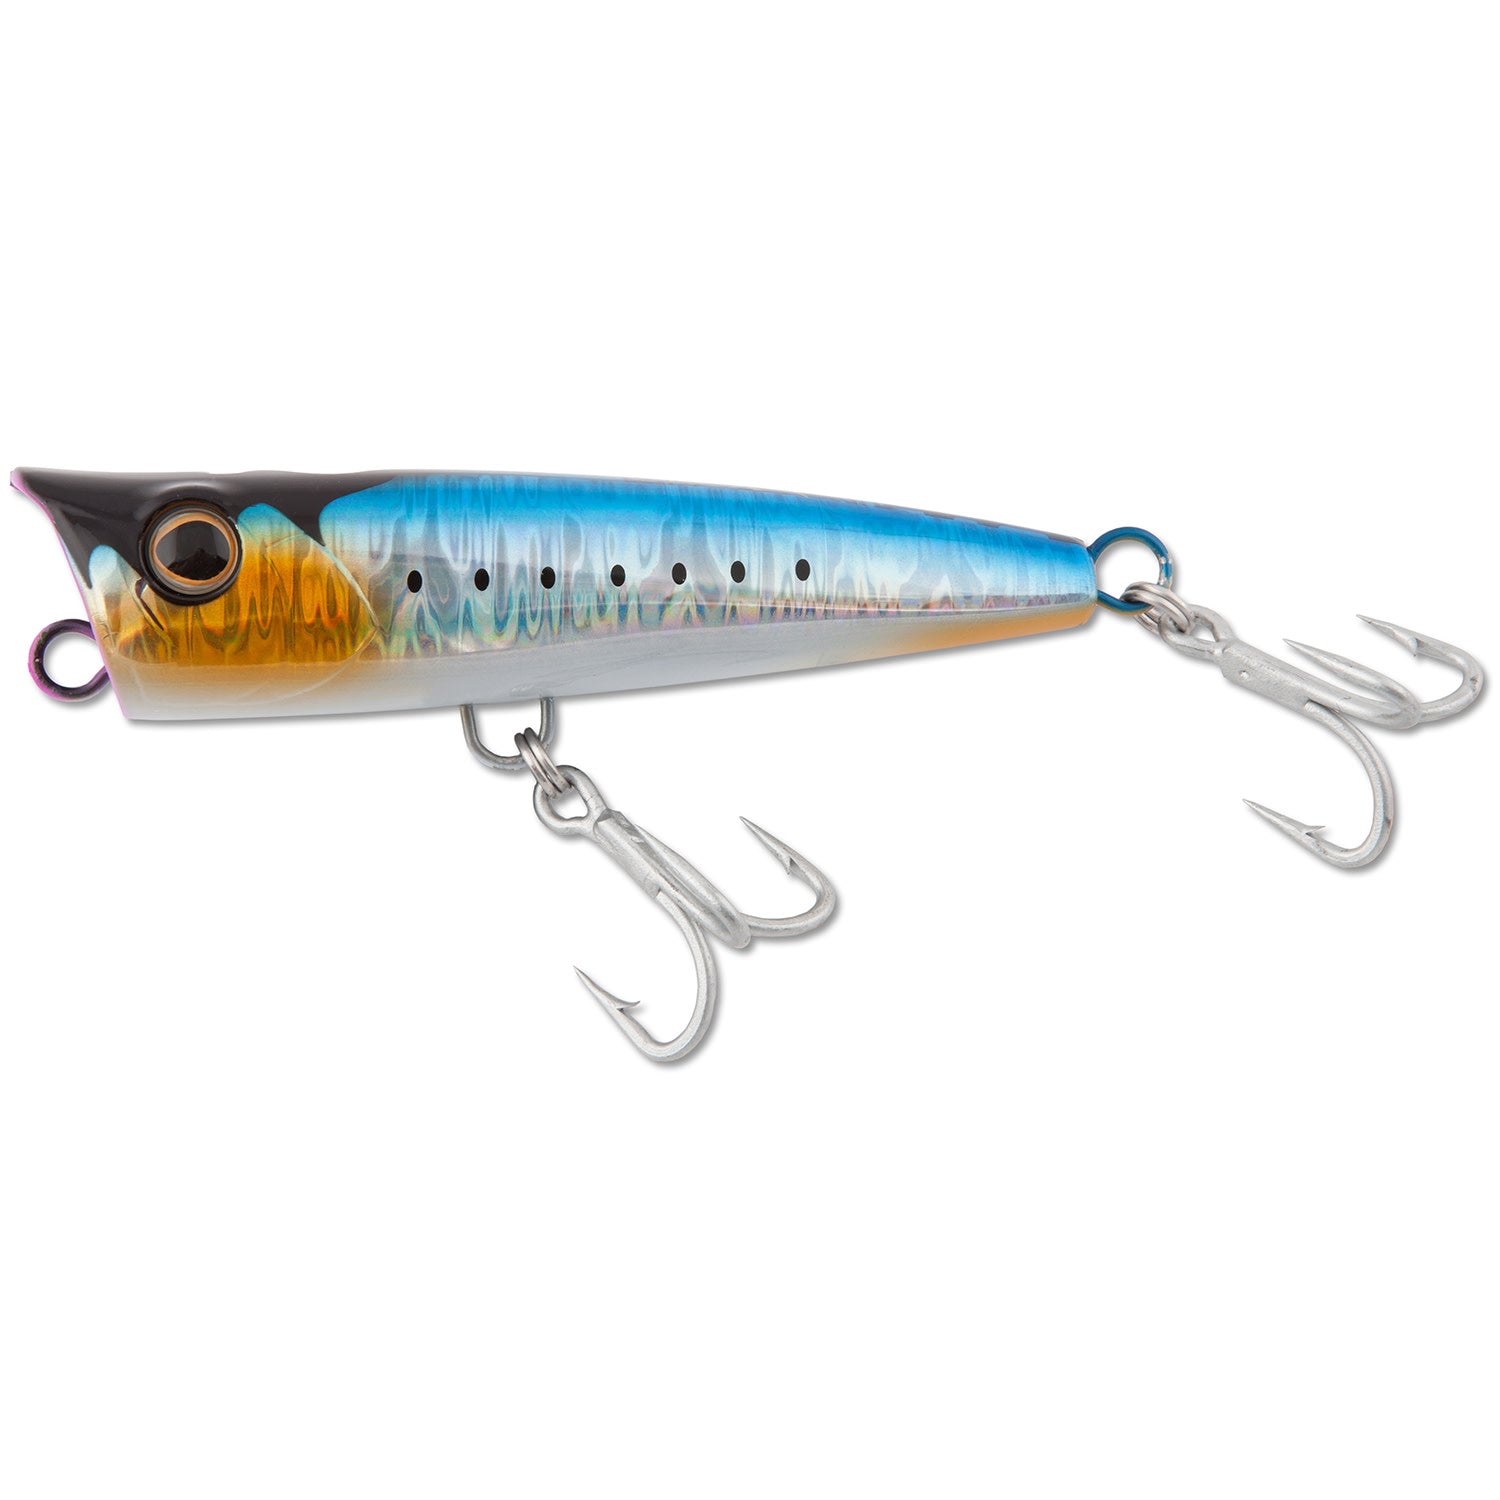 popping lure, popping lure Suppliers and Manufacturers at